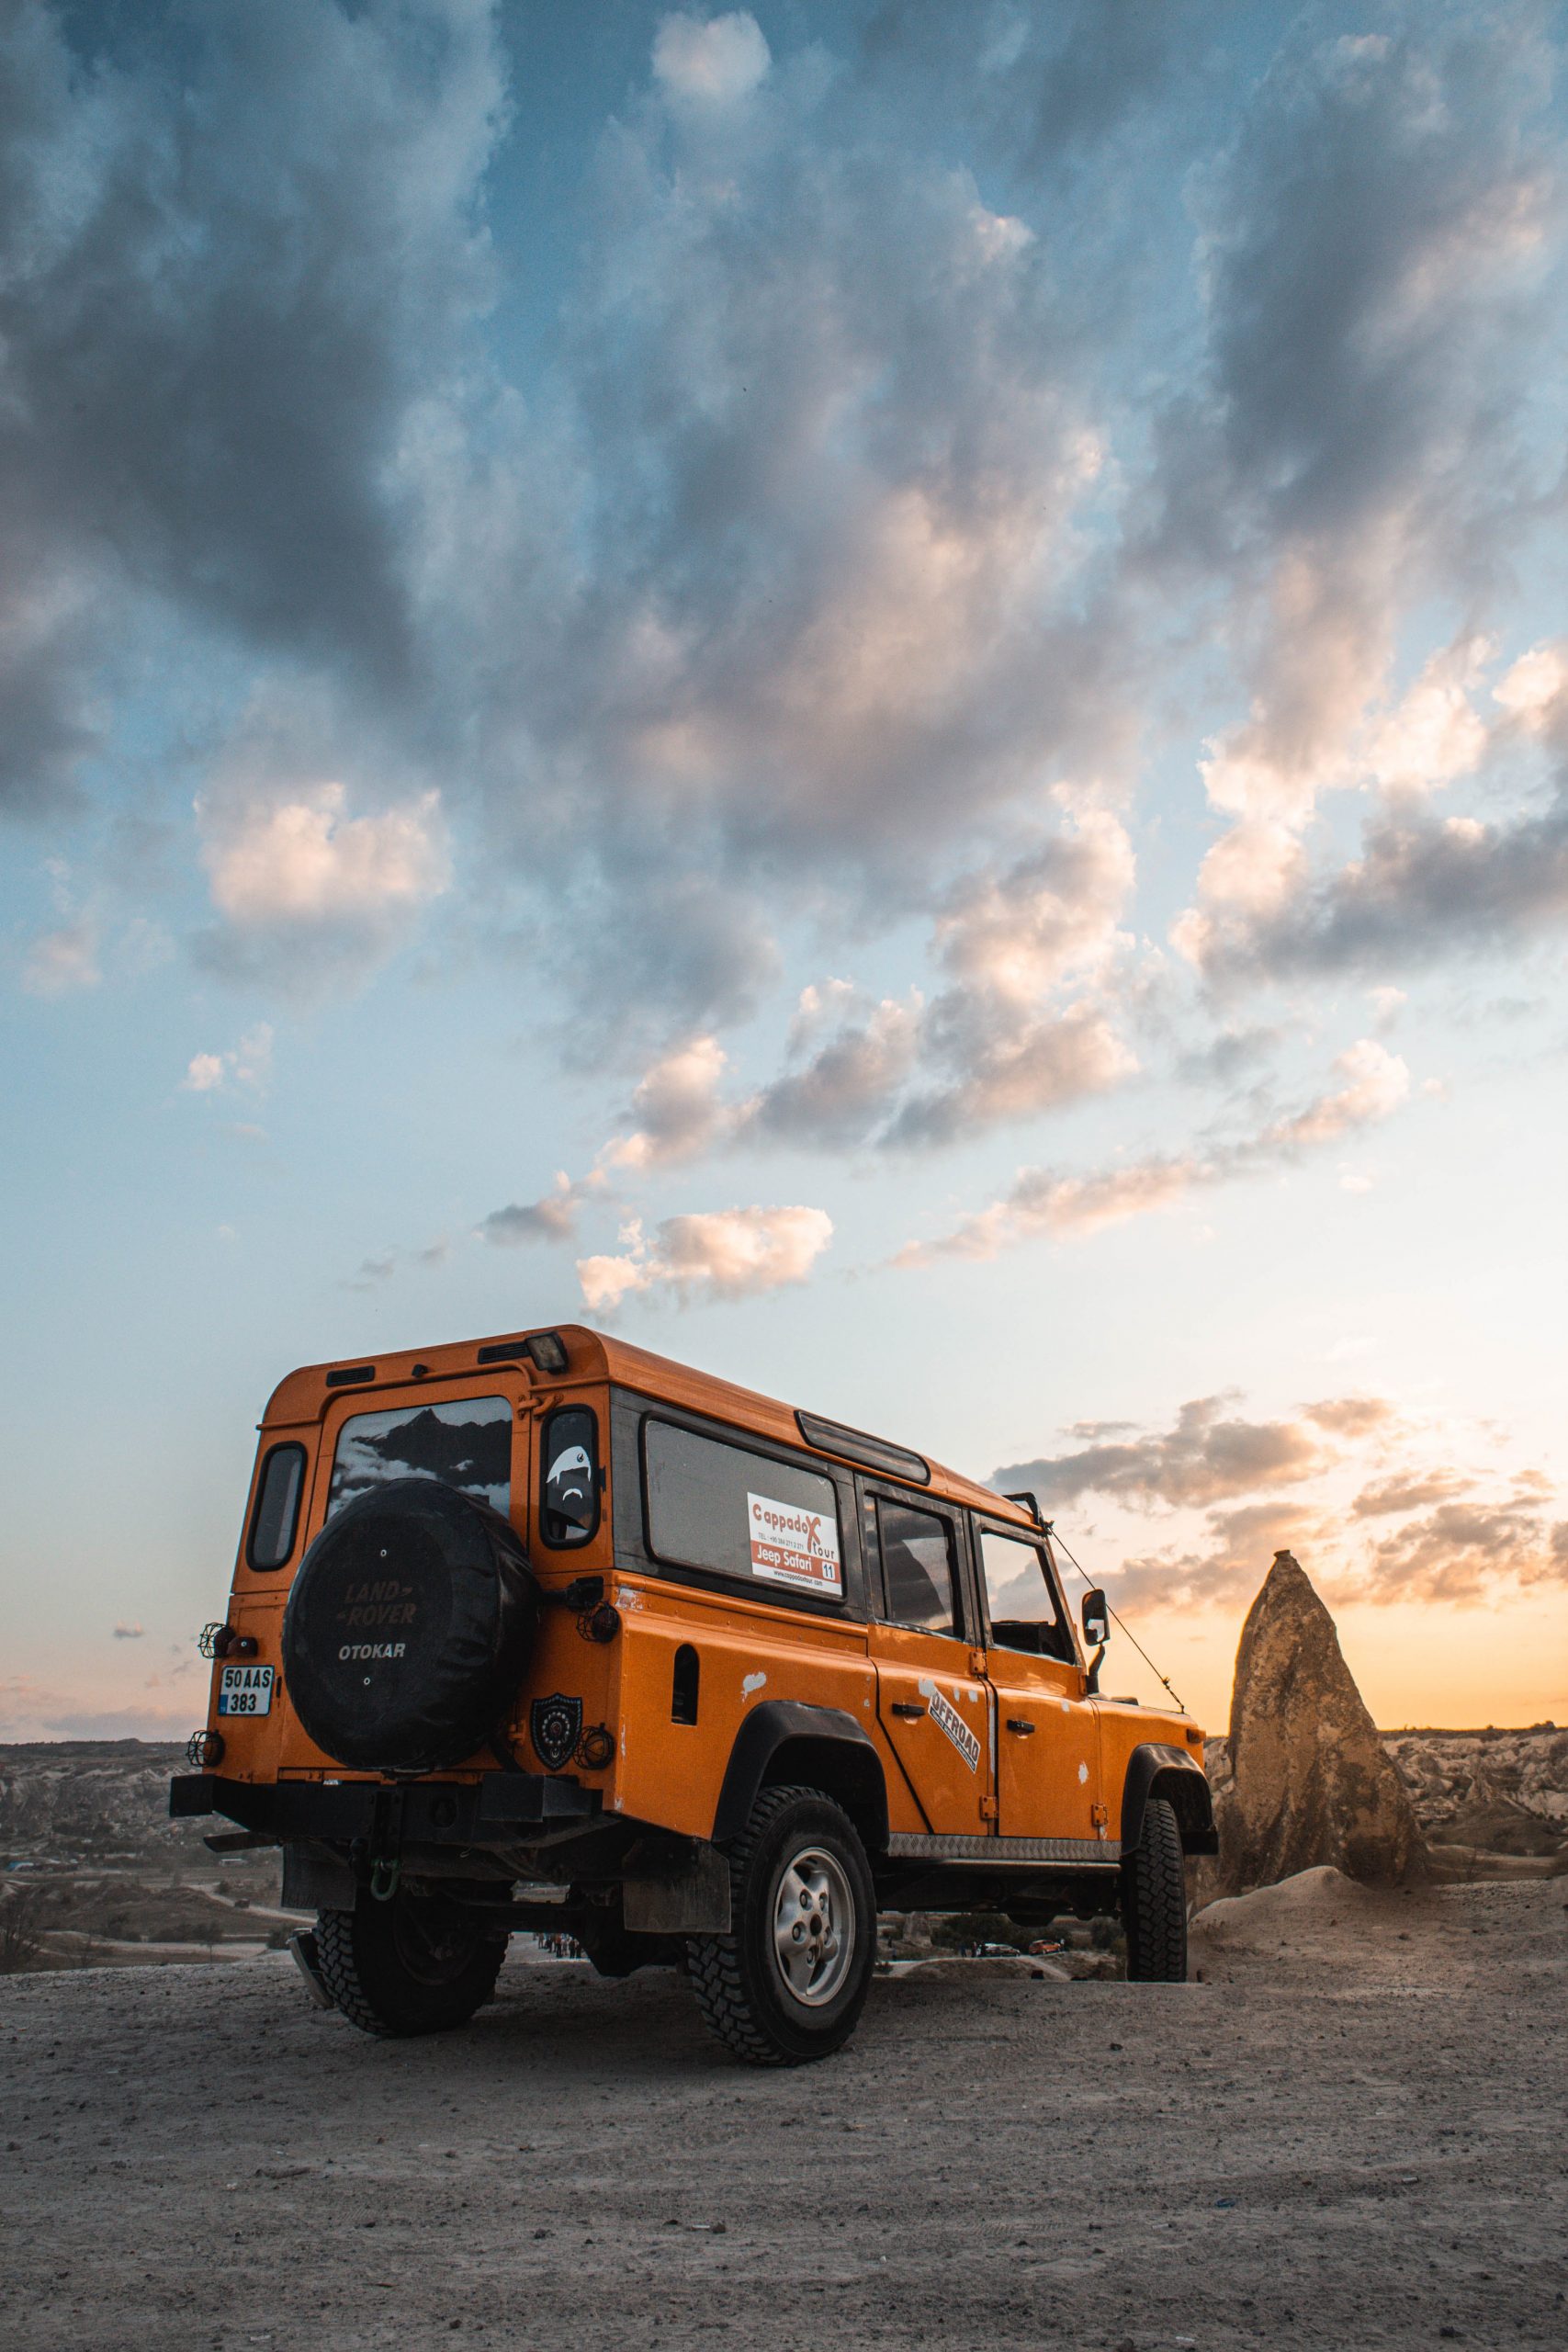 Mastering Extremes: Land Rovers’ Prowess in Harsh Environments